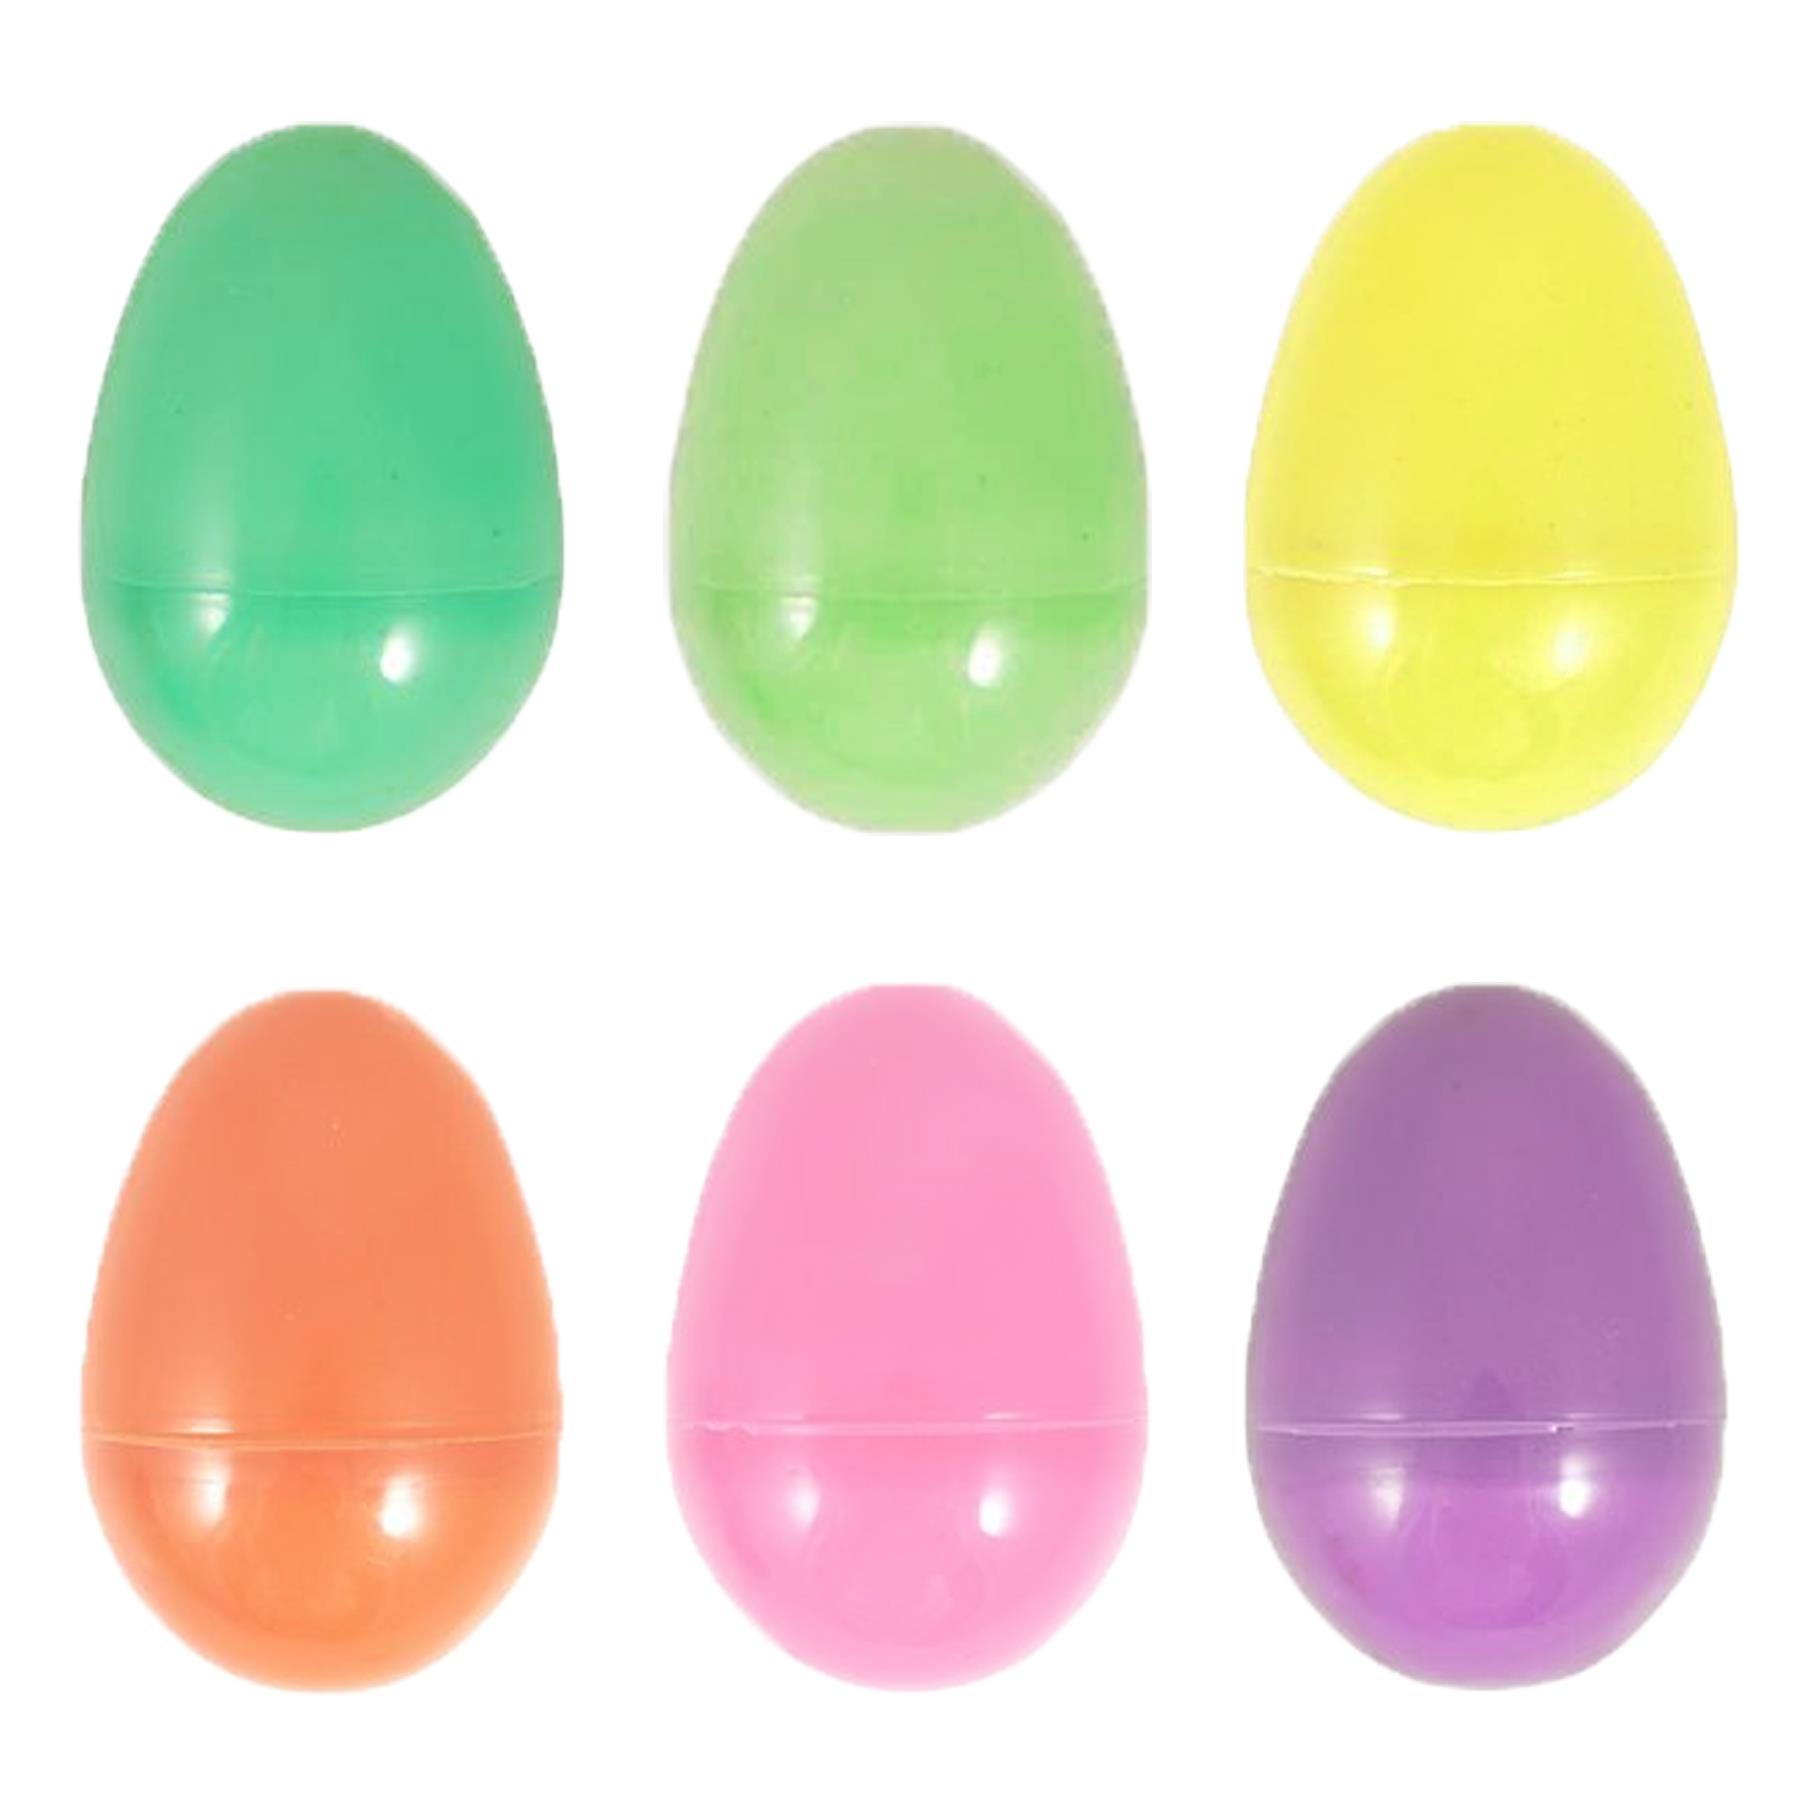 Easter Egg Hunt Accessories and Games - 6 Pack Plastic Fillable Eggs